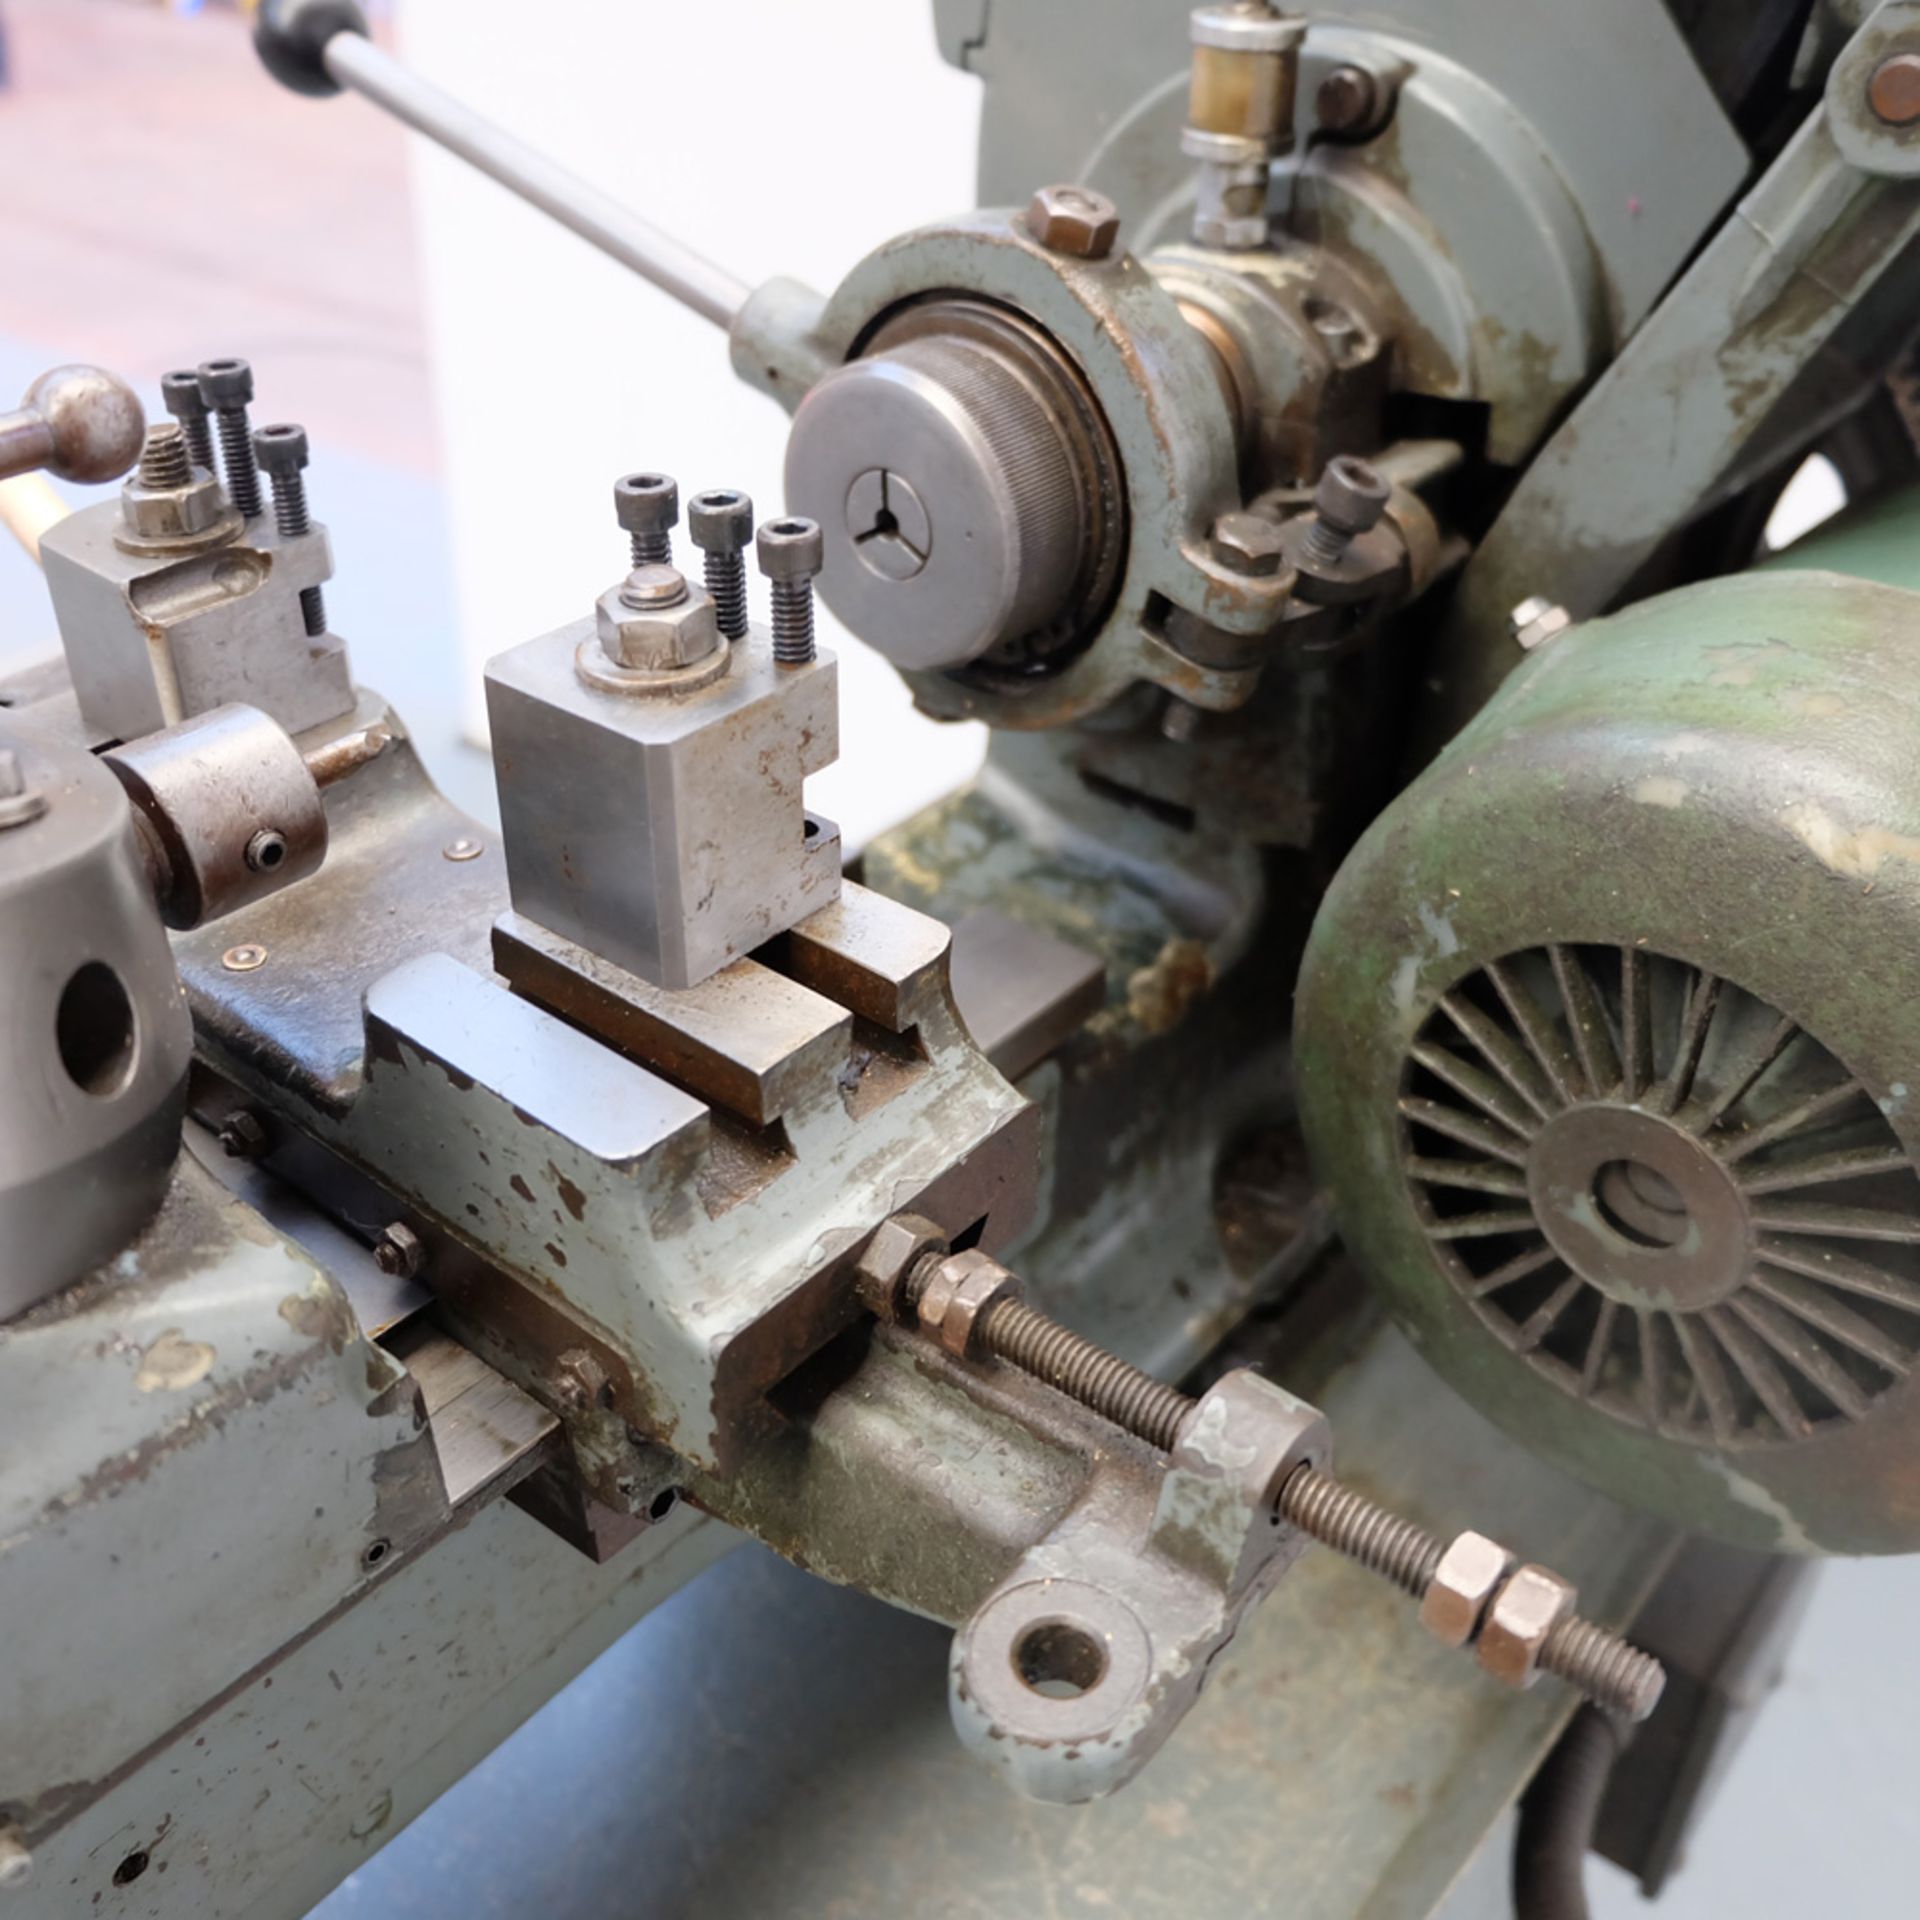 Myford C7 Capstan Lathe with Tri-Leva Speed Selector. Centre Height 3 1/2". - Image 9 of 11